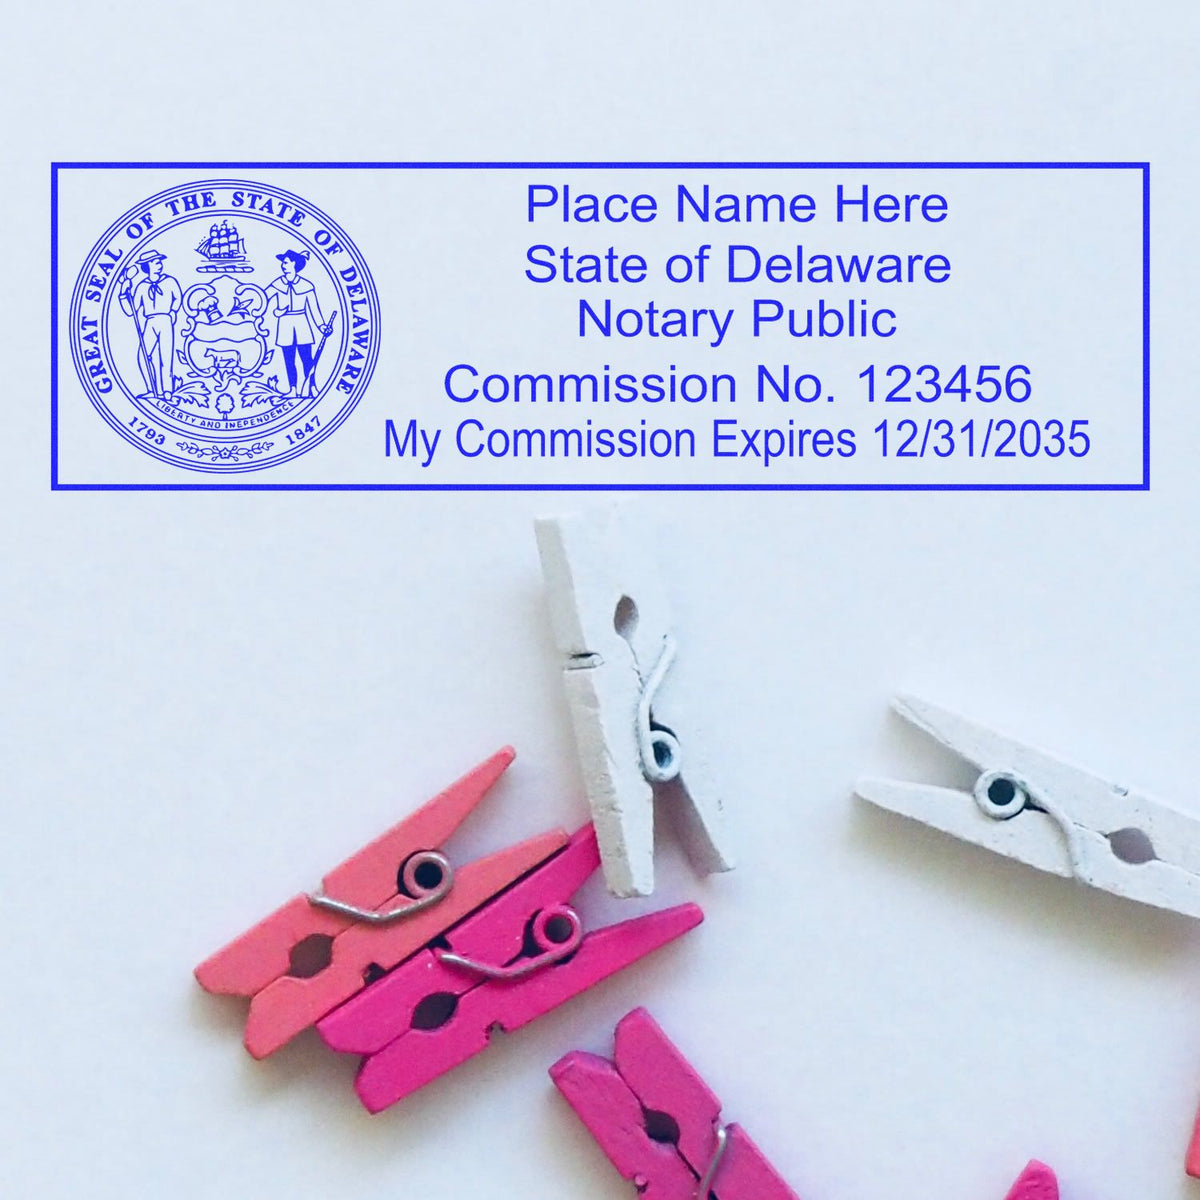 This paper is stamped with a sample imprint of the Wooden Handle Delaware State Seal Notary Public Stamp, signifying its quality and reliability.